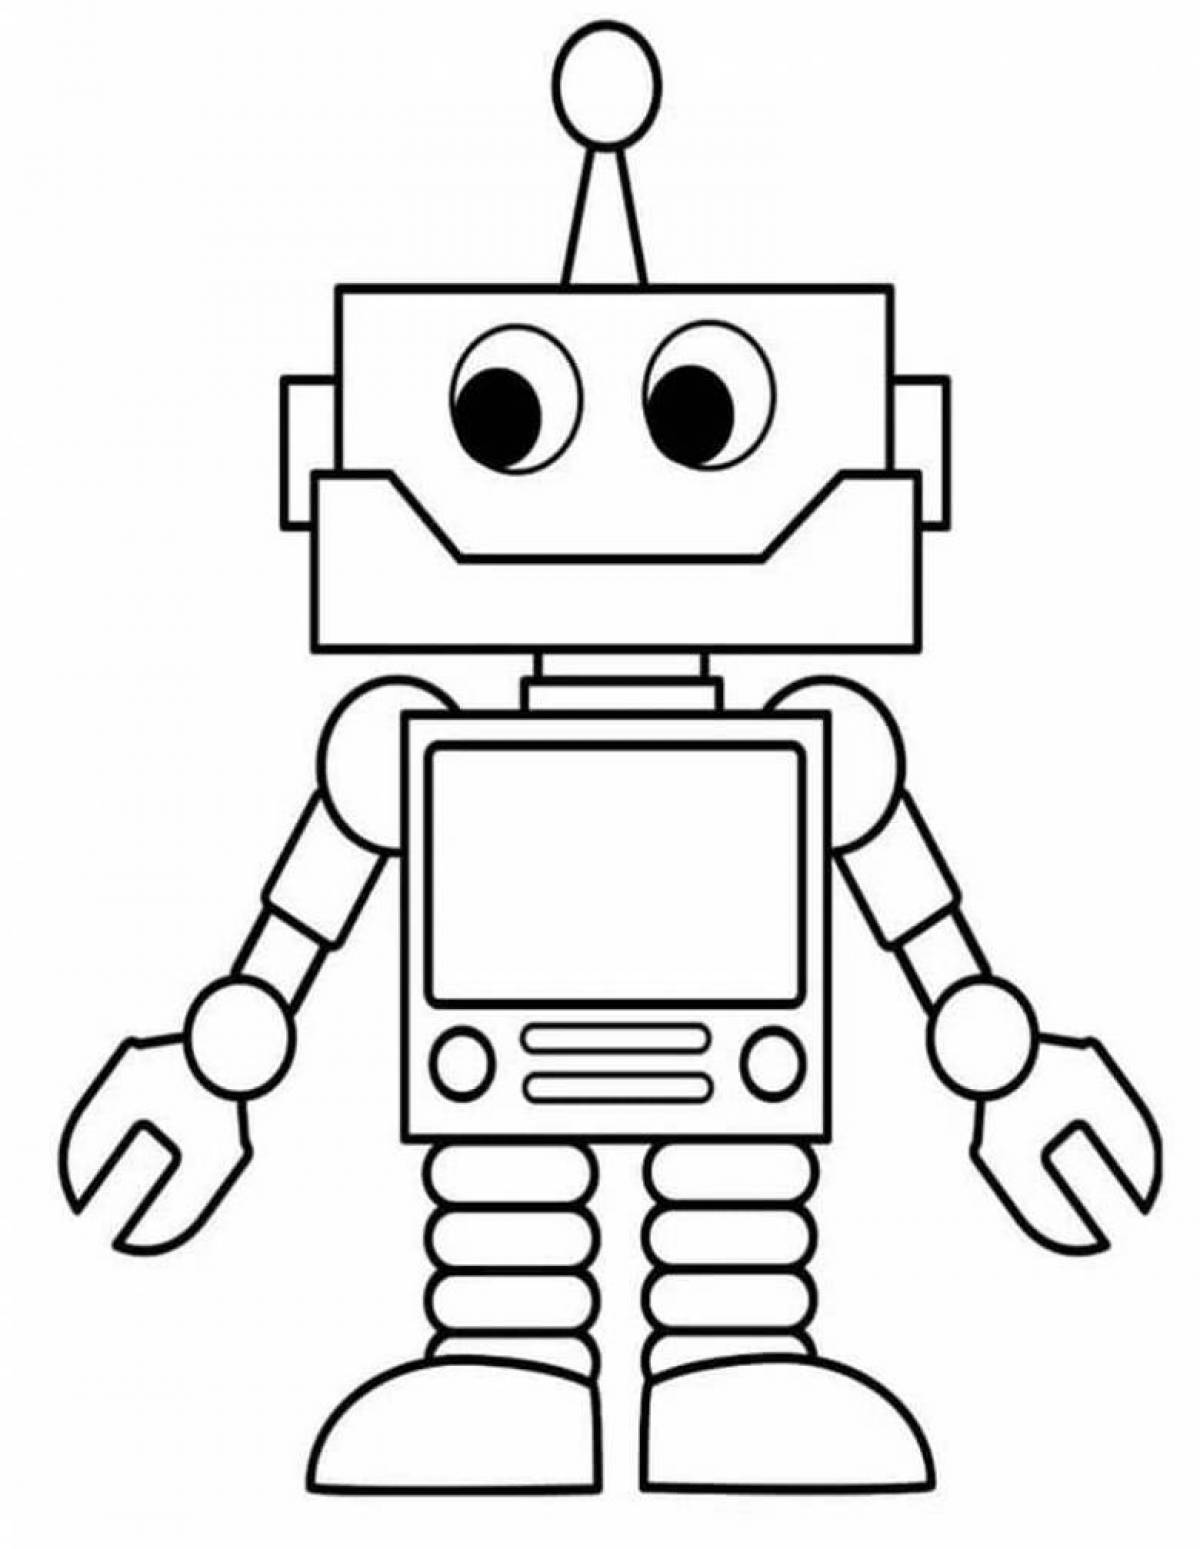 Fun coloring robot for 5-6 year olds